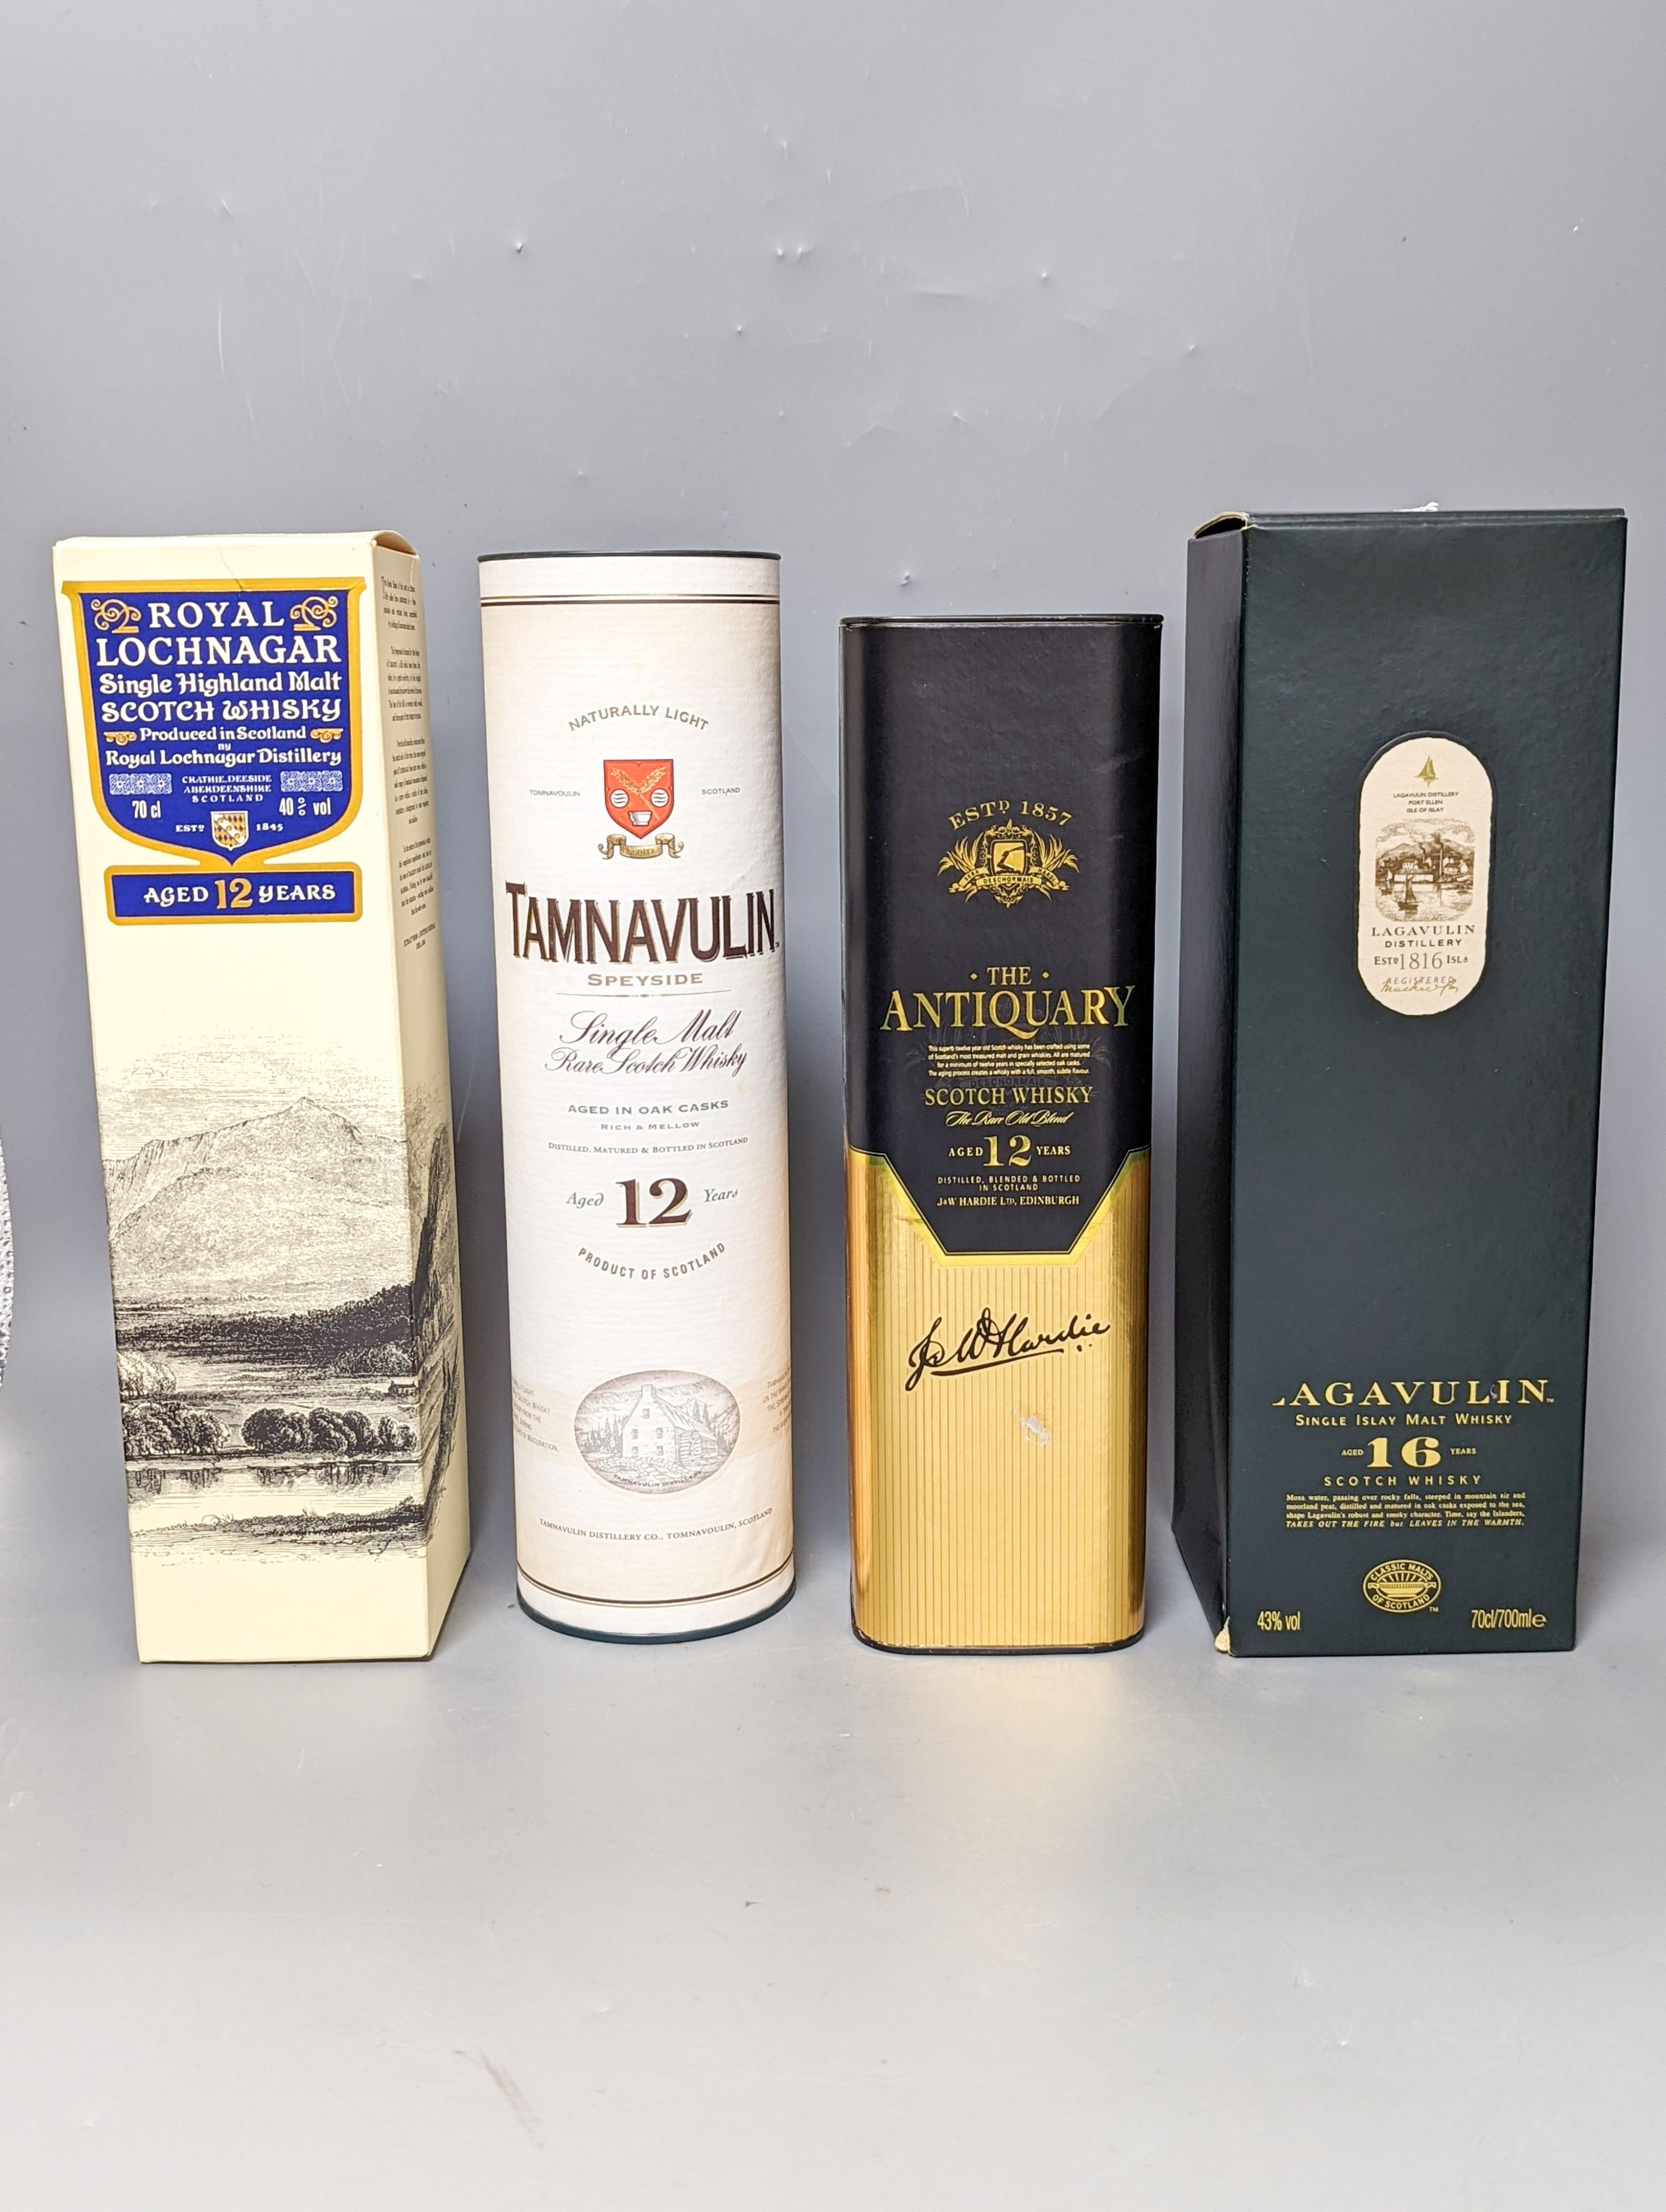 Four assorted bottles of whisky including Lagavulin 16 year old single malt, Royal Lochnagar 12 year old single malt, Tamnavulin single malt aged 12 years and The Antiquary aged 12 years, all boxed.